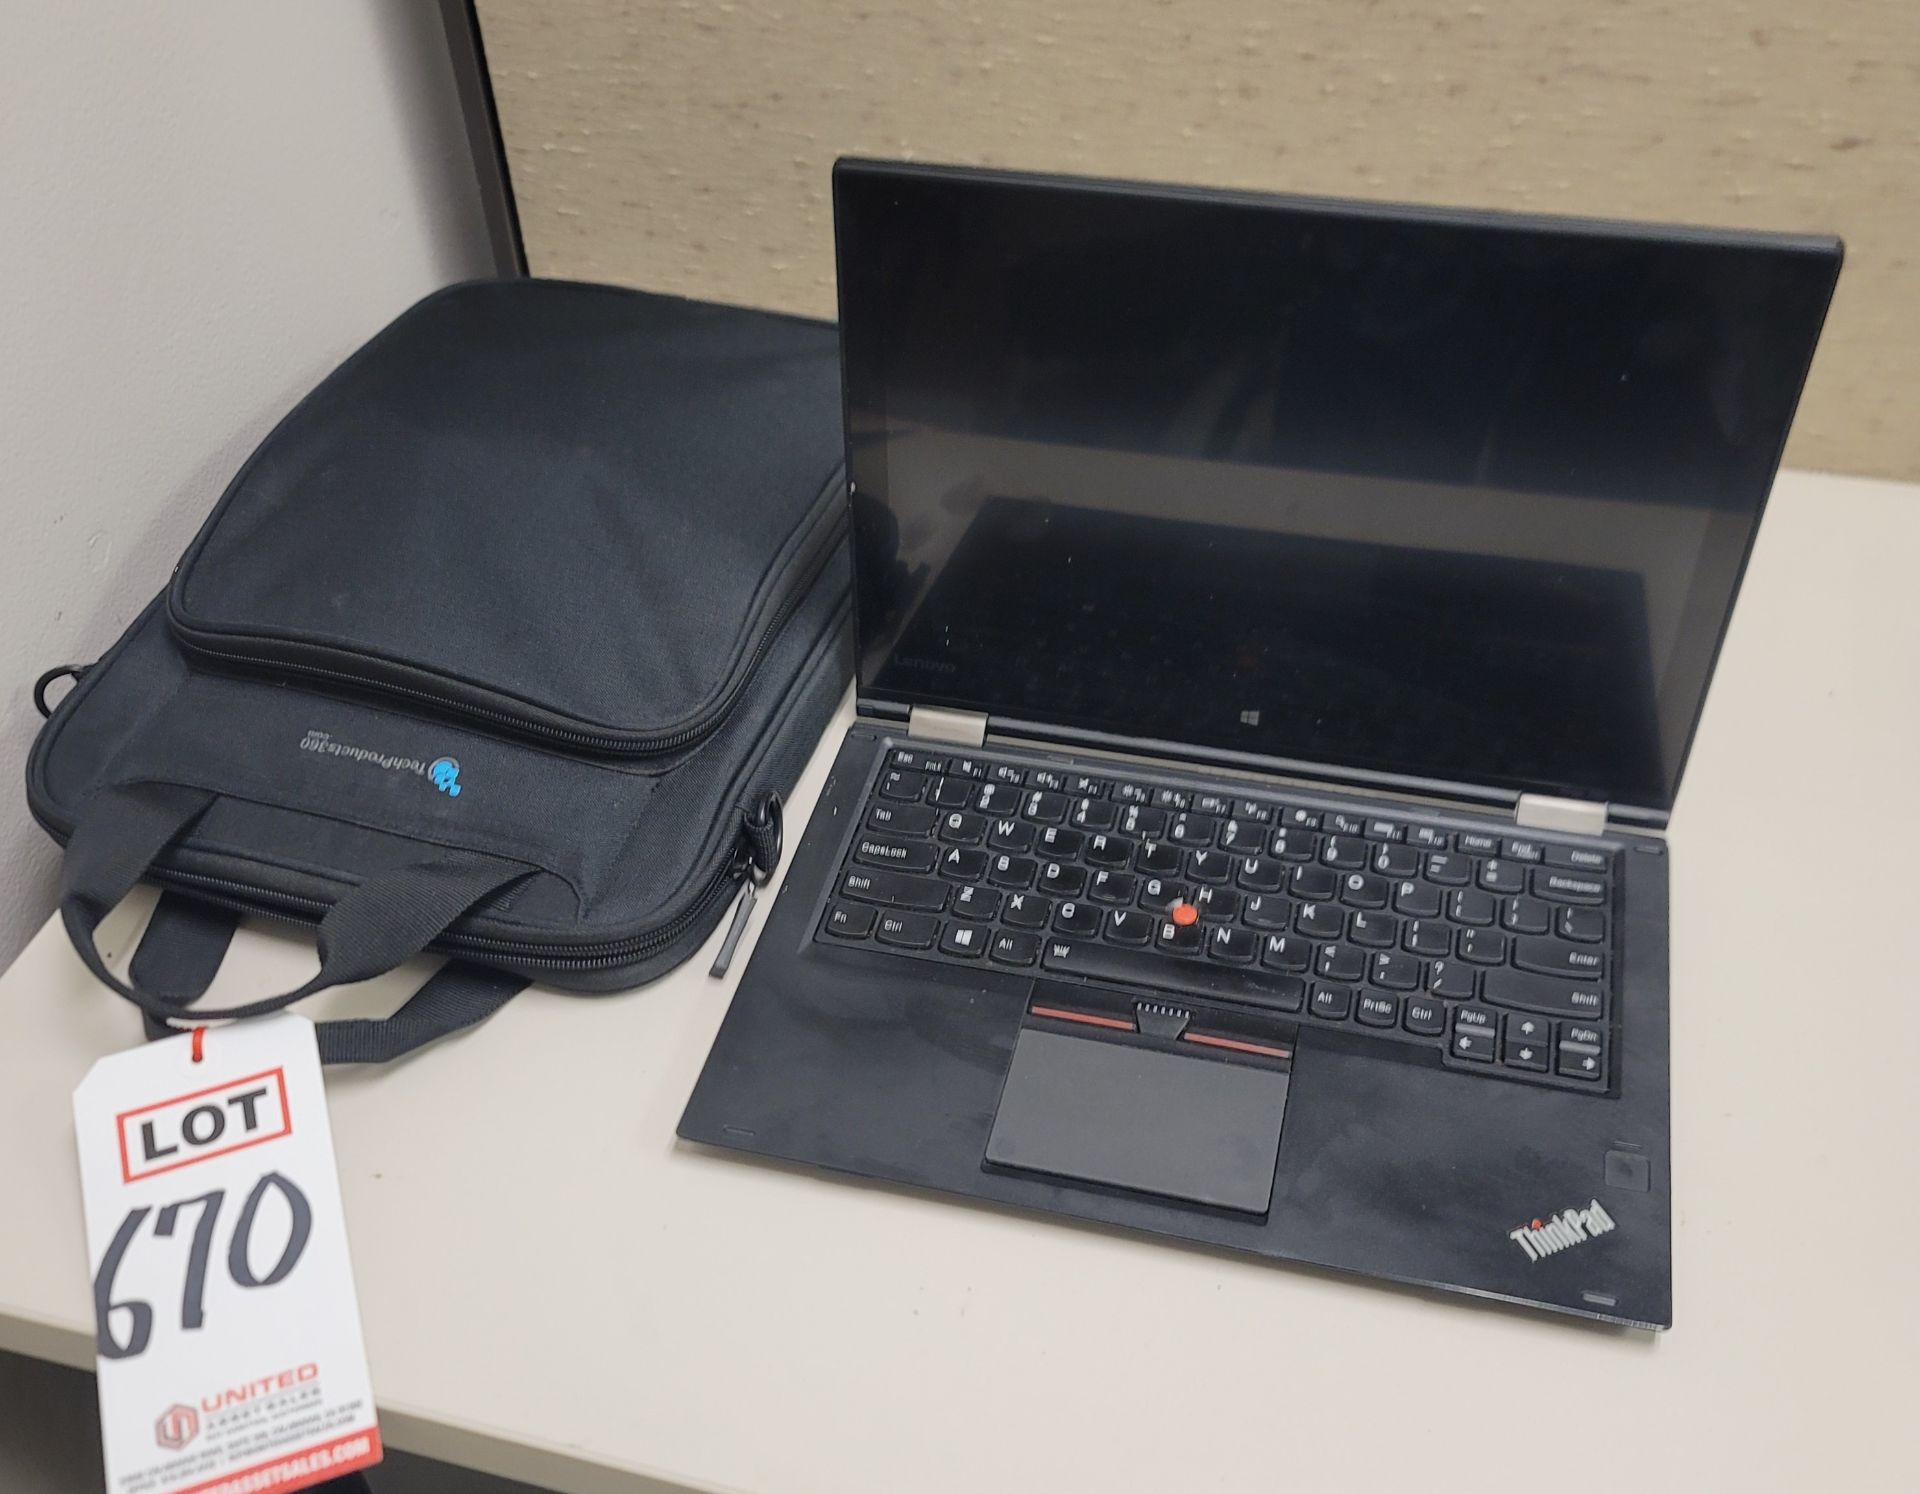 LOT - LENOVO THINKPAD LAPTOP COMPUTER W/ WINDOWS 10, W/ SHOULDER BAG, CHARGING CABLE, MOUSE